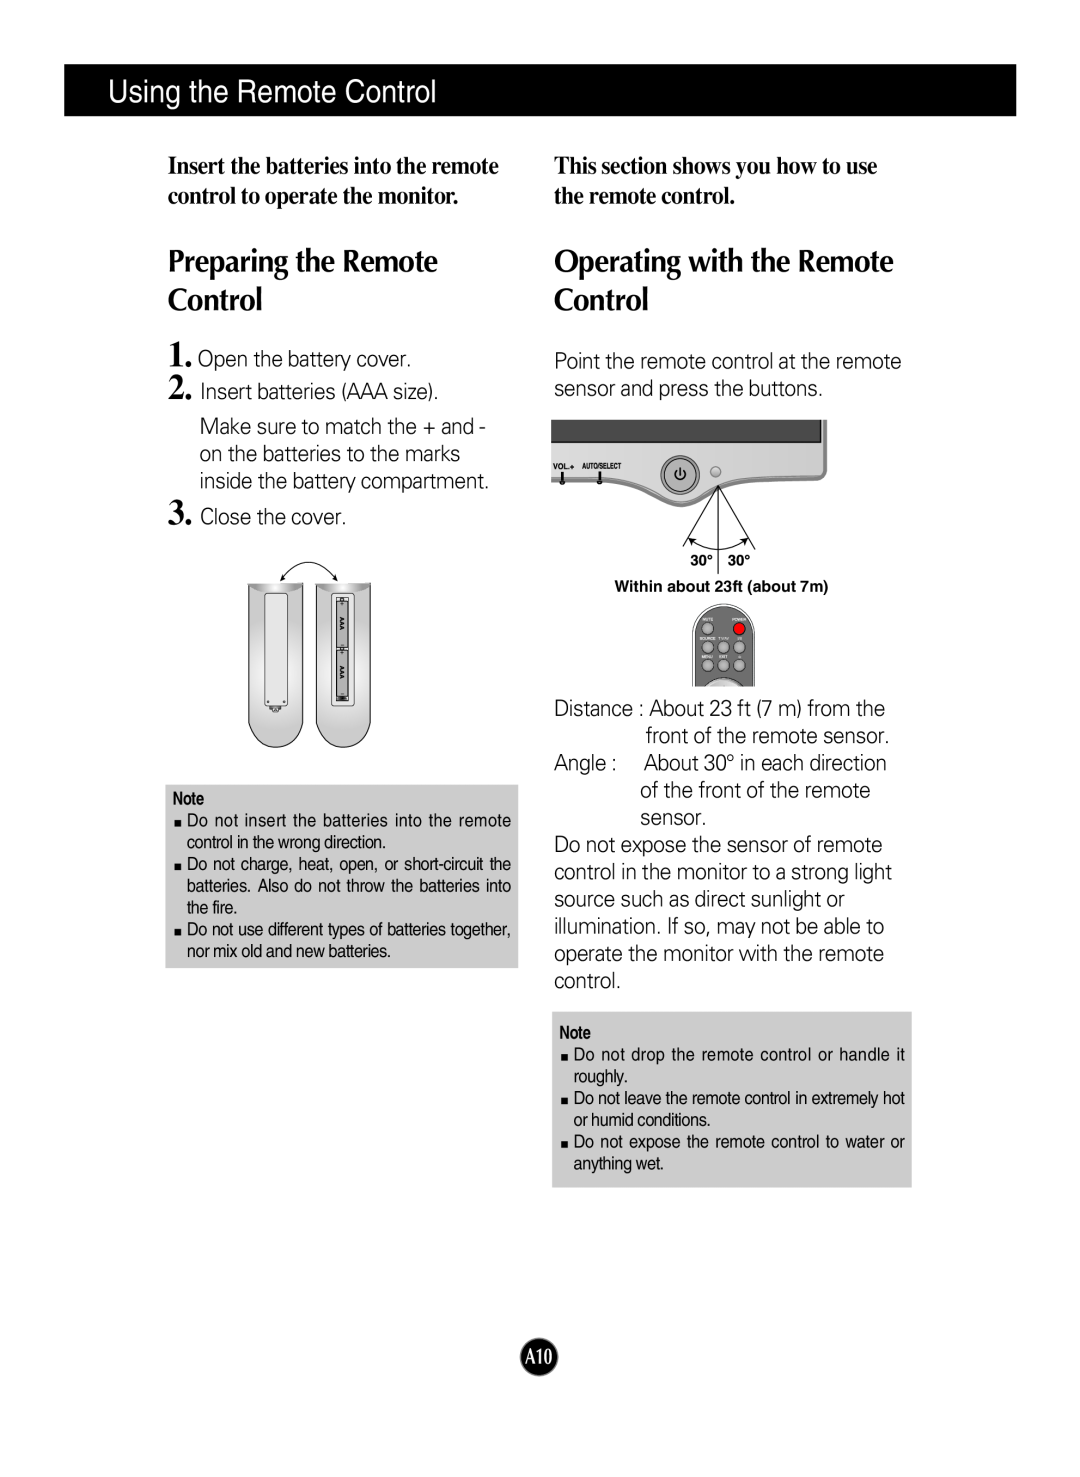 LG Electronics L2323T manual Preparing the Remote, Control, control to operate the monitor, the remote control 